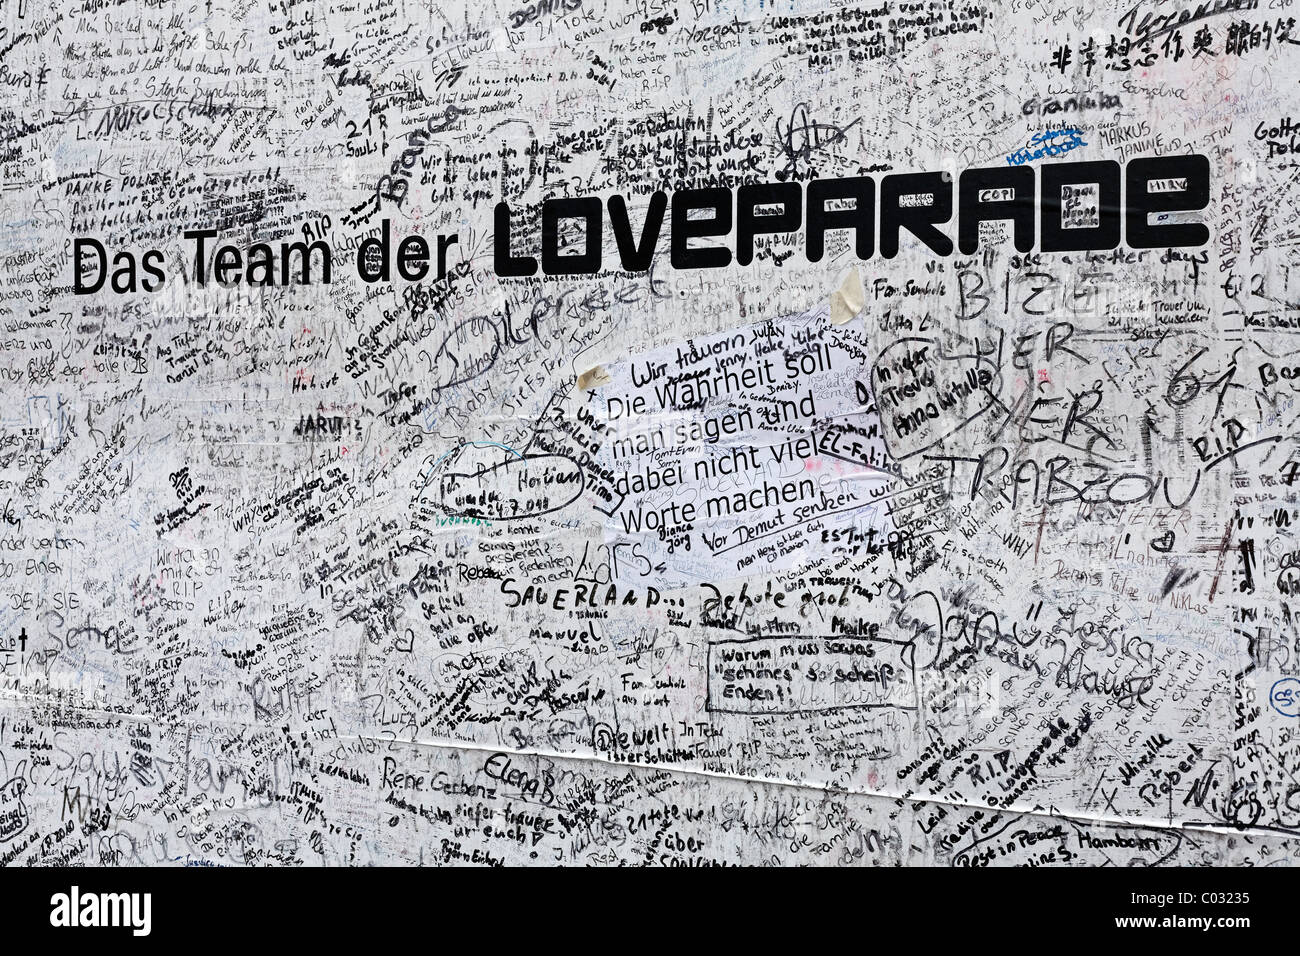 Poster with sympathetic notes and signatures, to remember the victims of the crowd crush at the Loveparade 2010, Duisburg Stock Photo